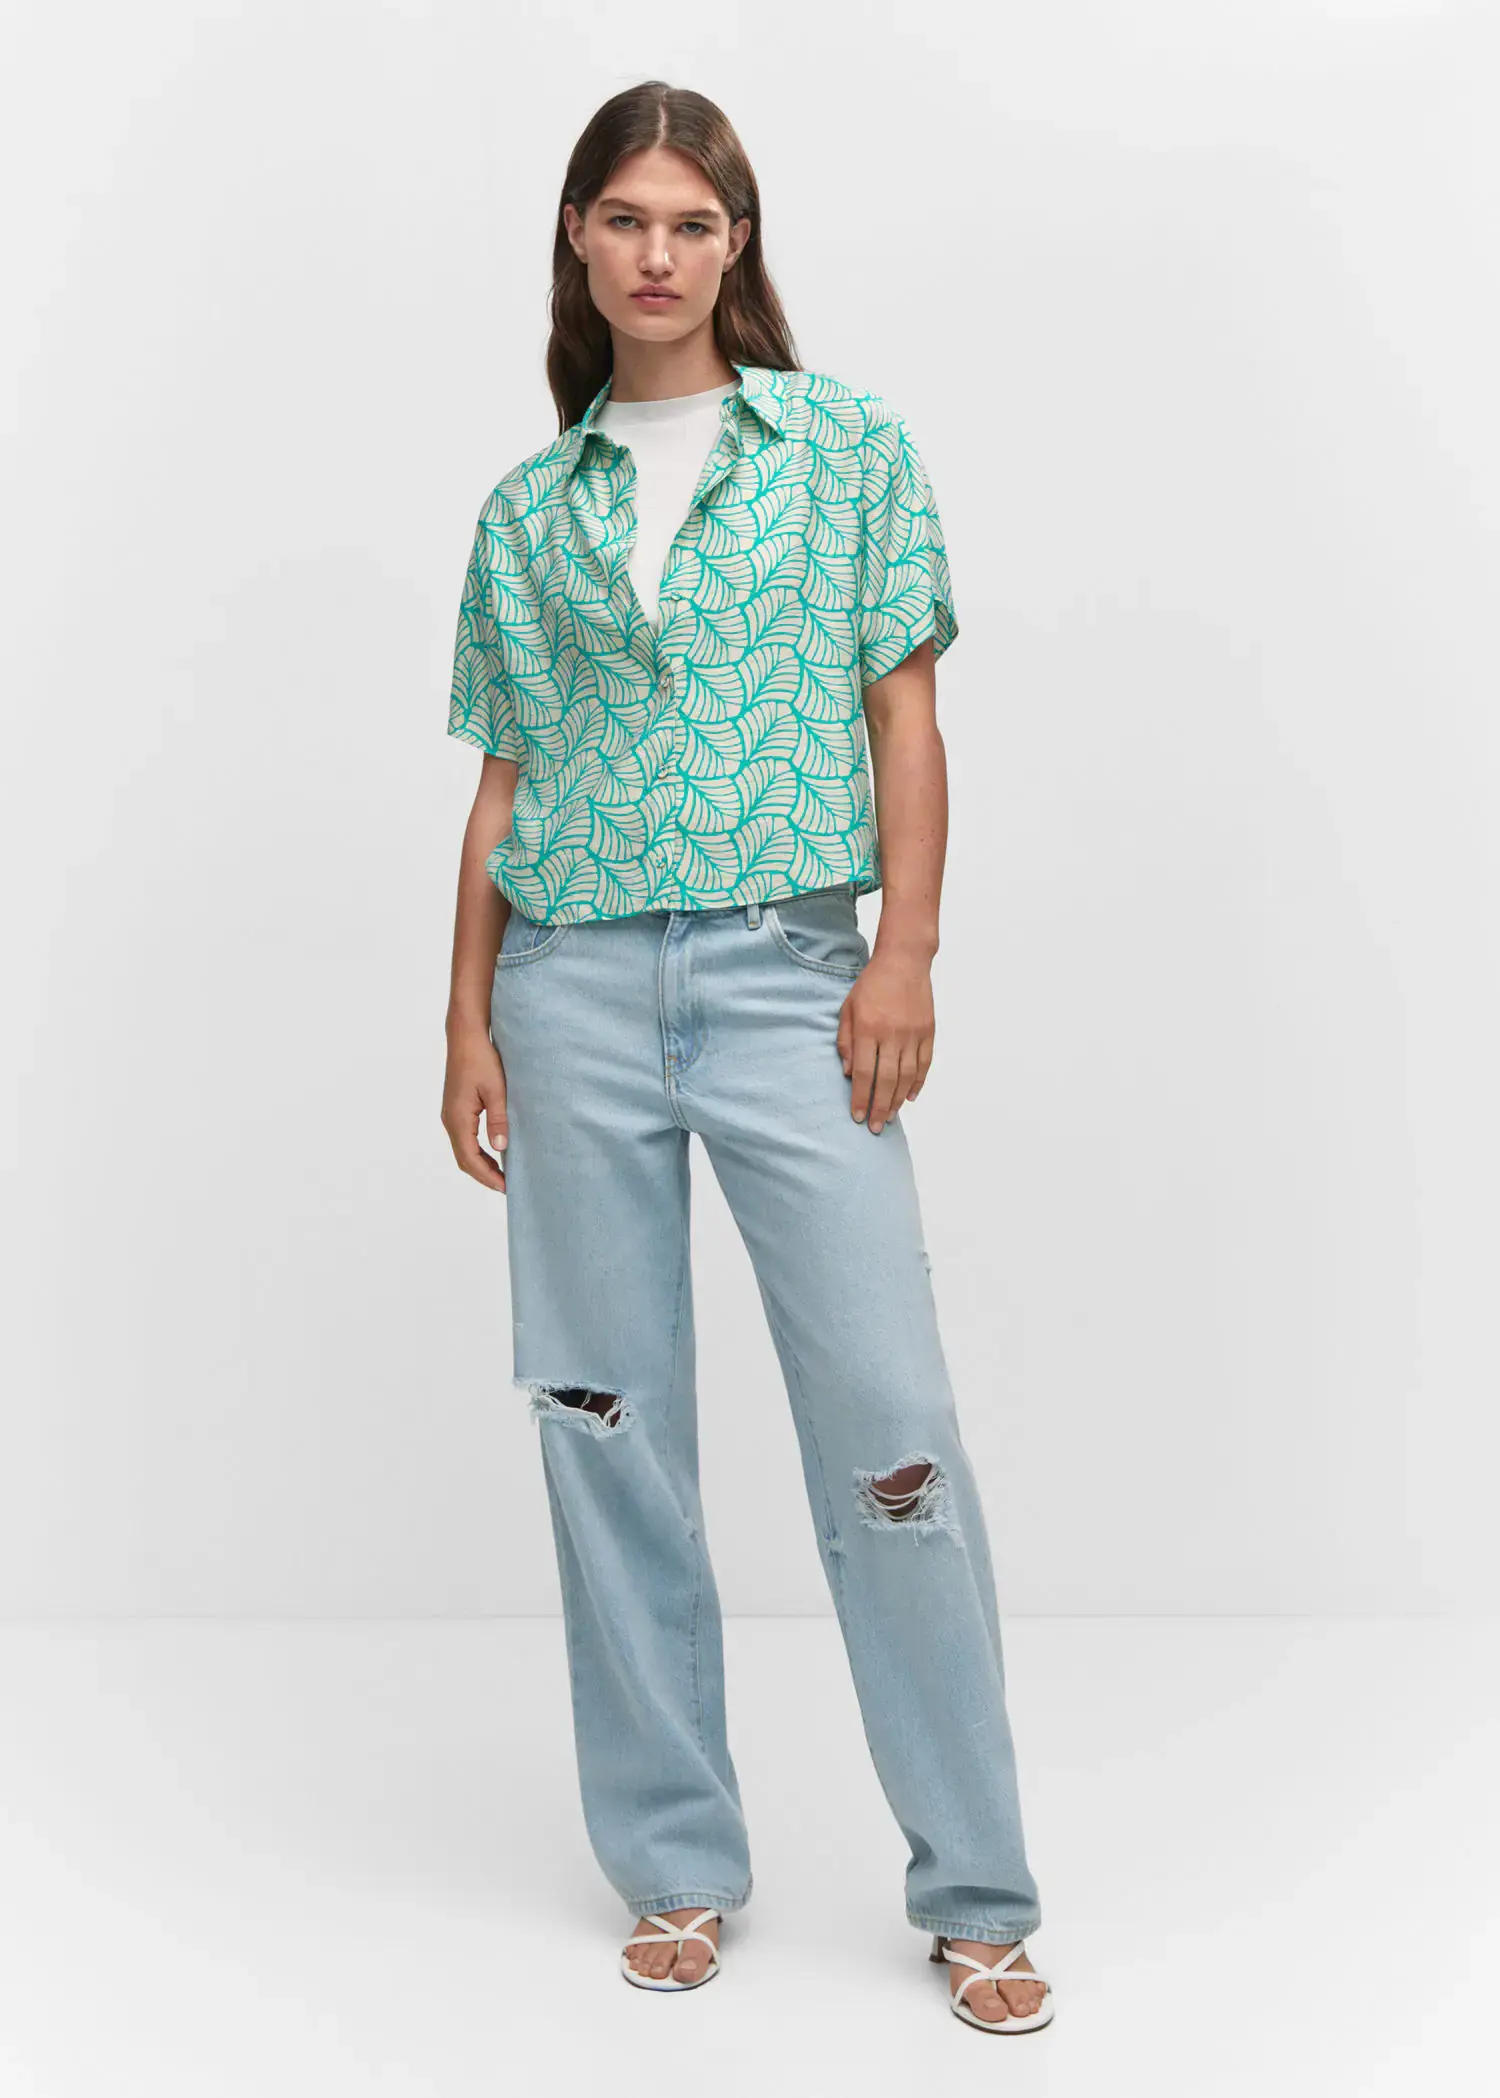 Mango Buttoned printed shirt. a woman in a green shirt and blue jeans. 